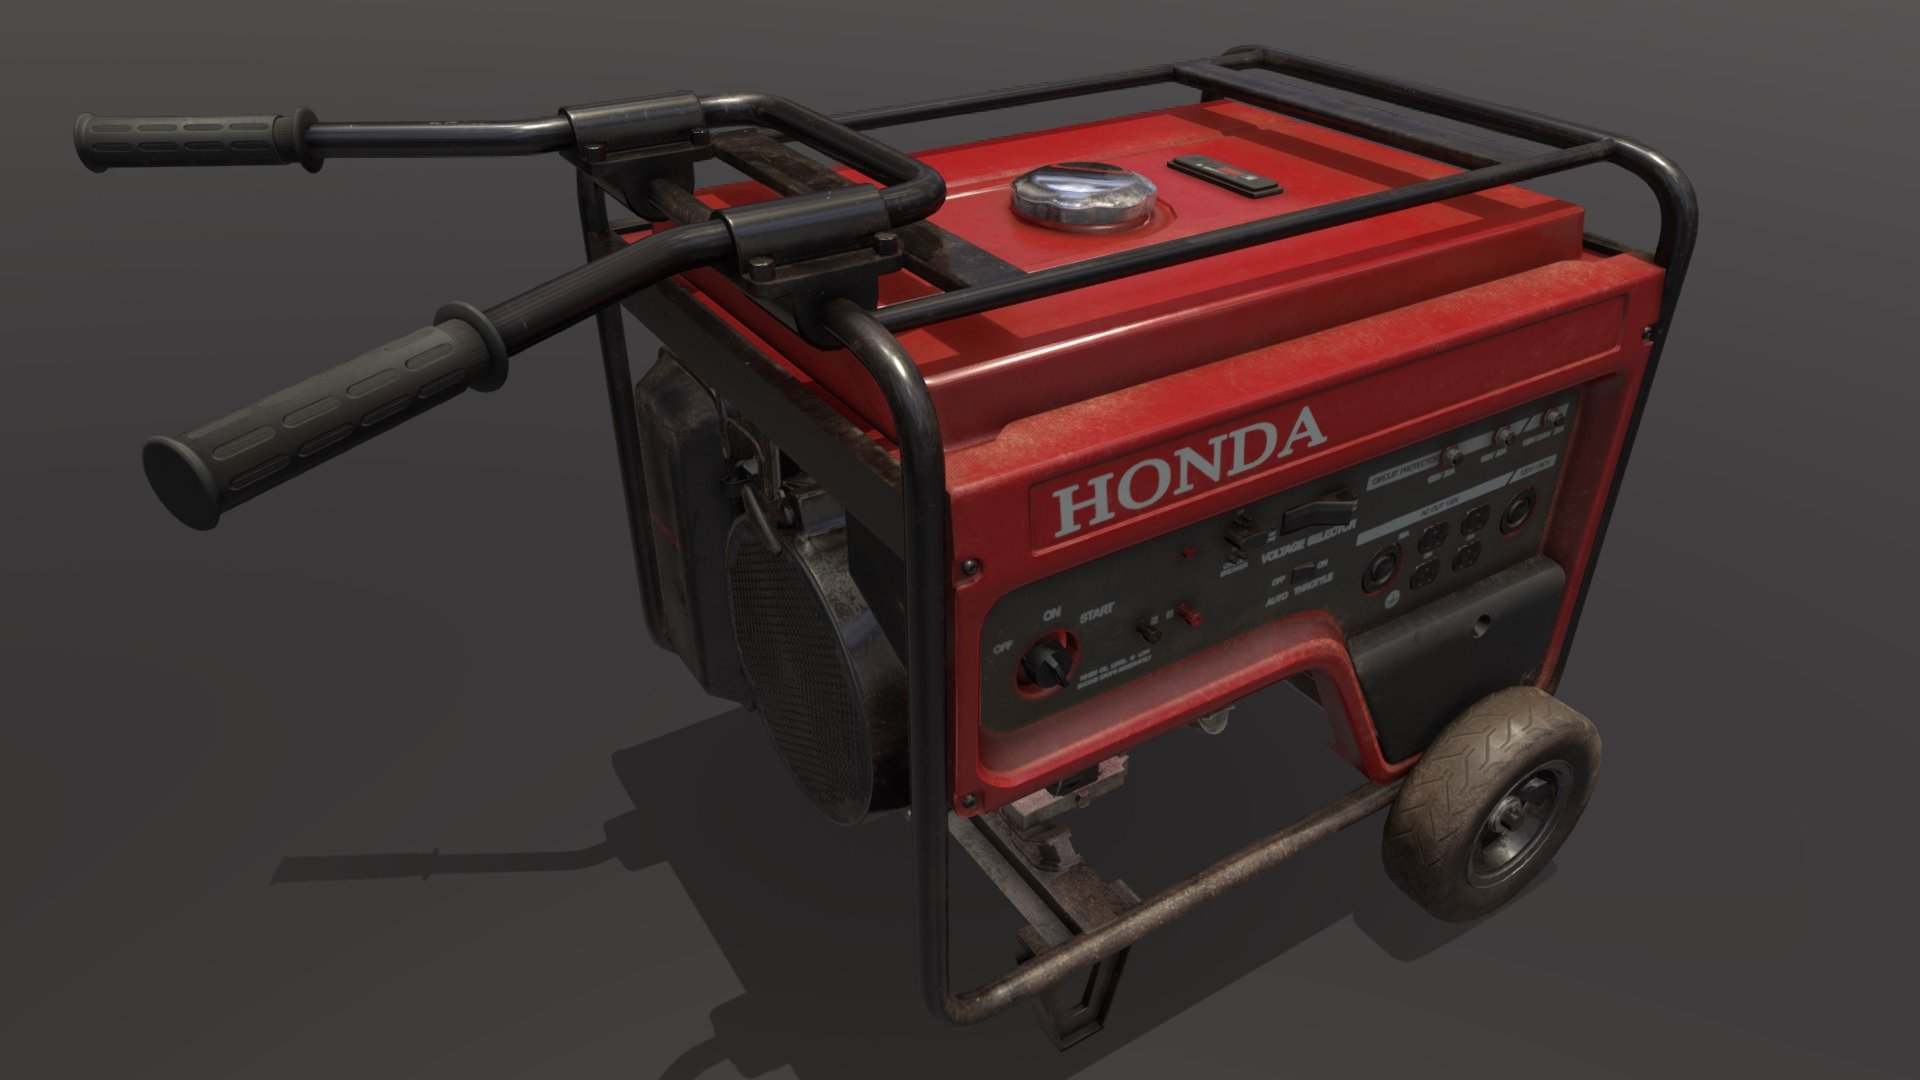 Realistic Generator created from the Honda 4000SX. This project took quite a while to complete, however I am very pleased with everything I learned and how it turned out. Great practice for learning about scope and practicing PBR materials. Created in 3DS Max, textured in Substance Painter, and rendered in Marmoset Toolbag 3d model